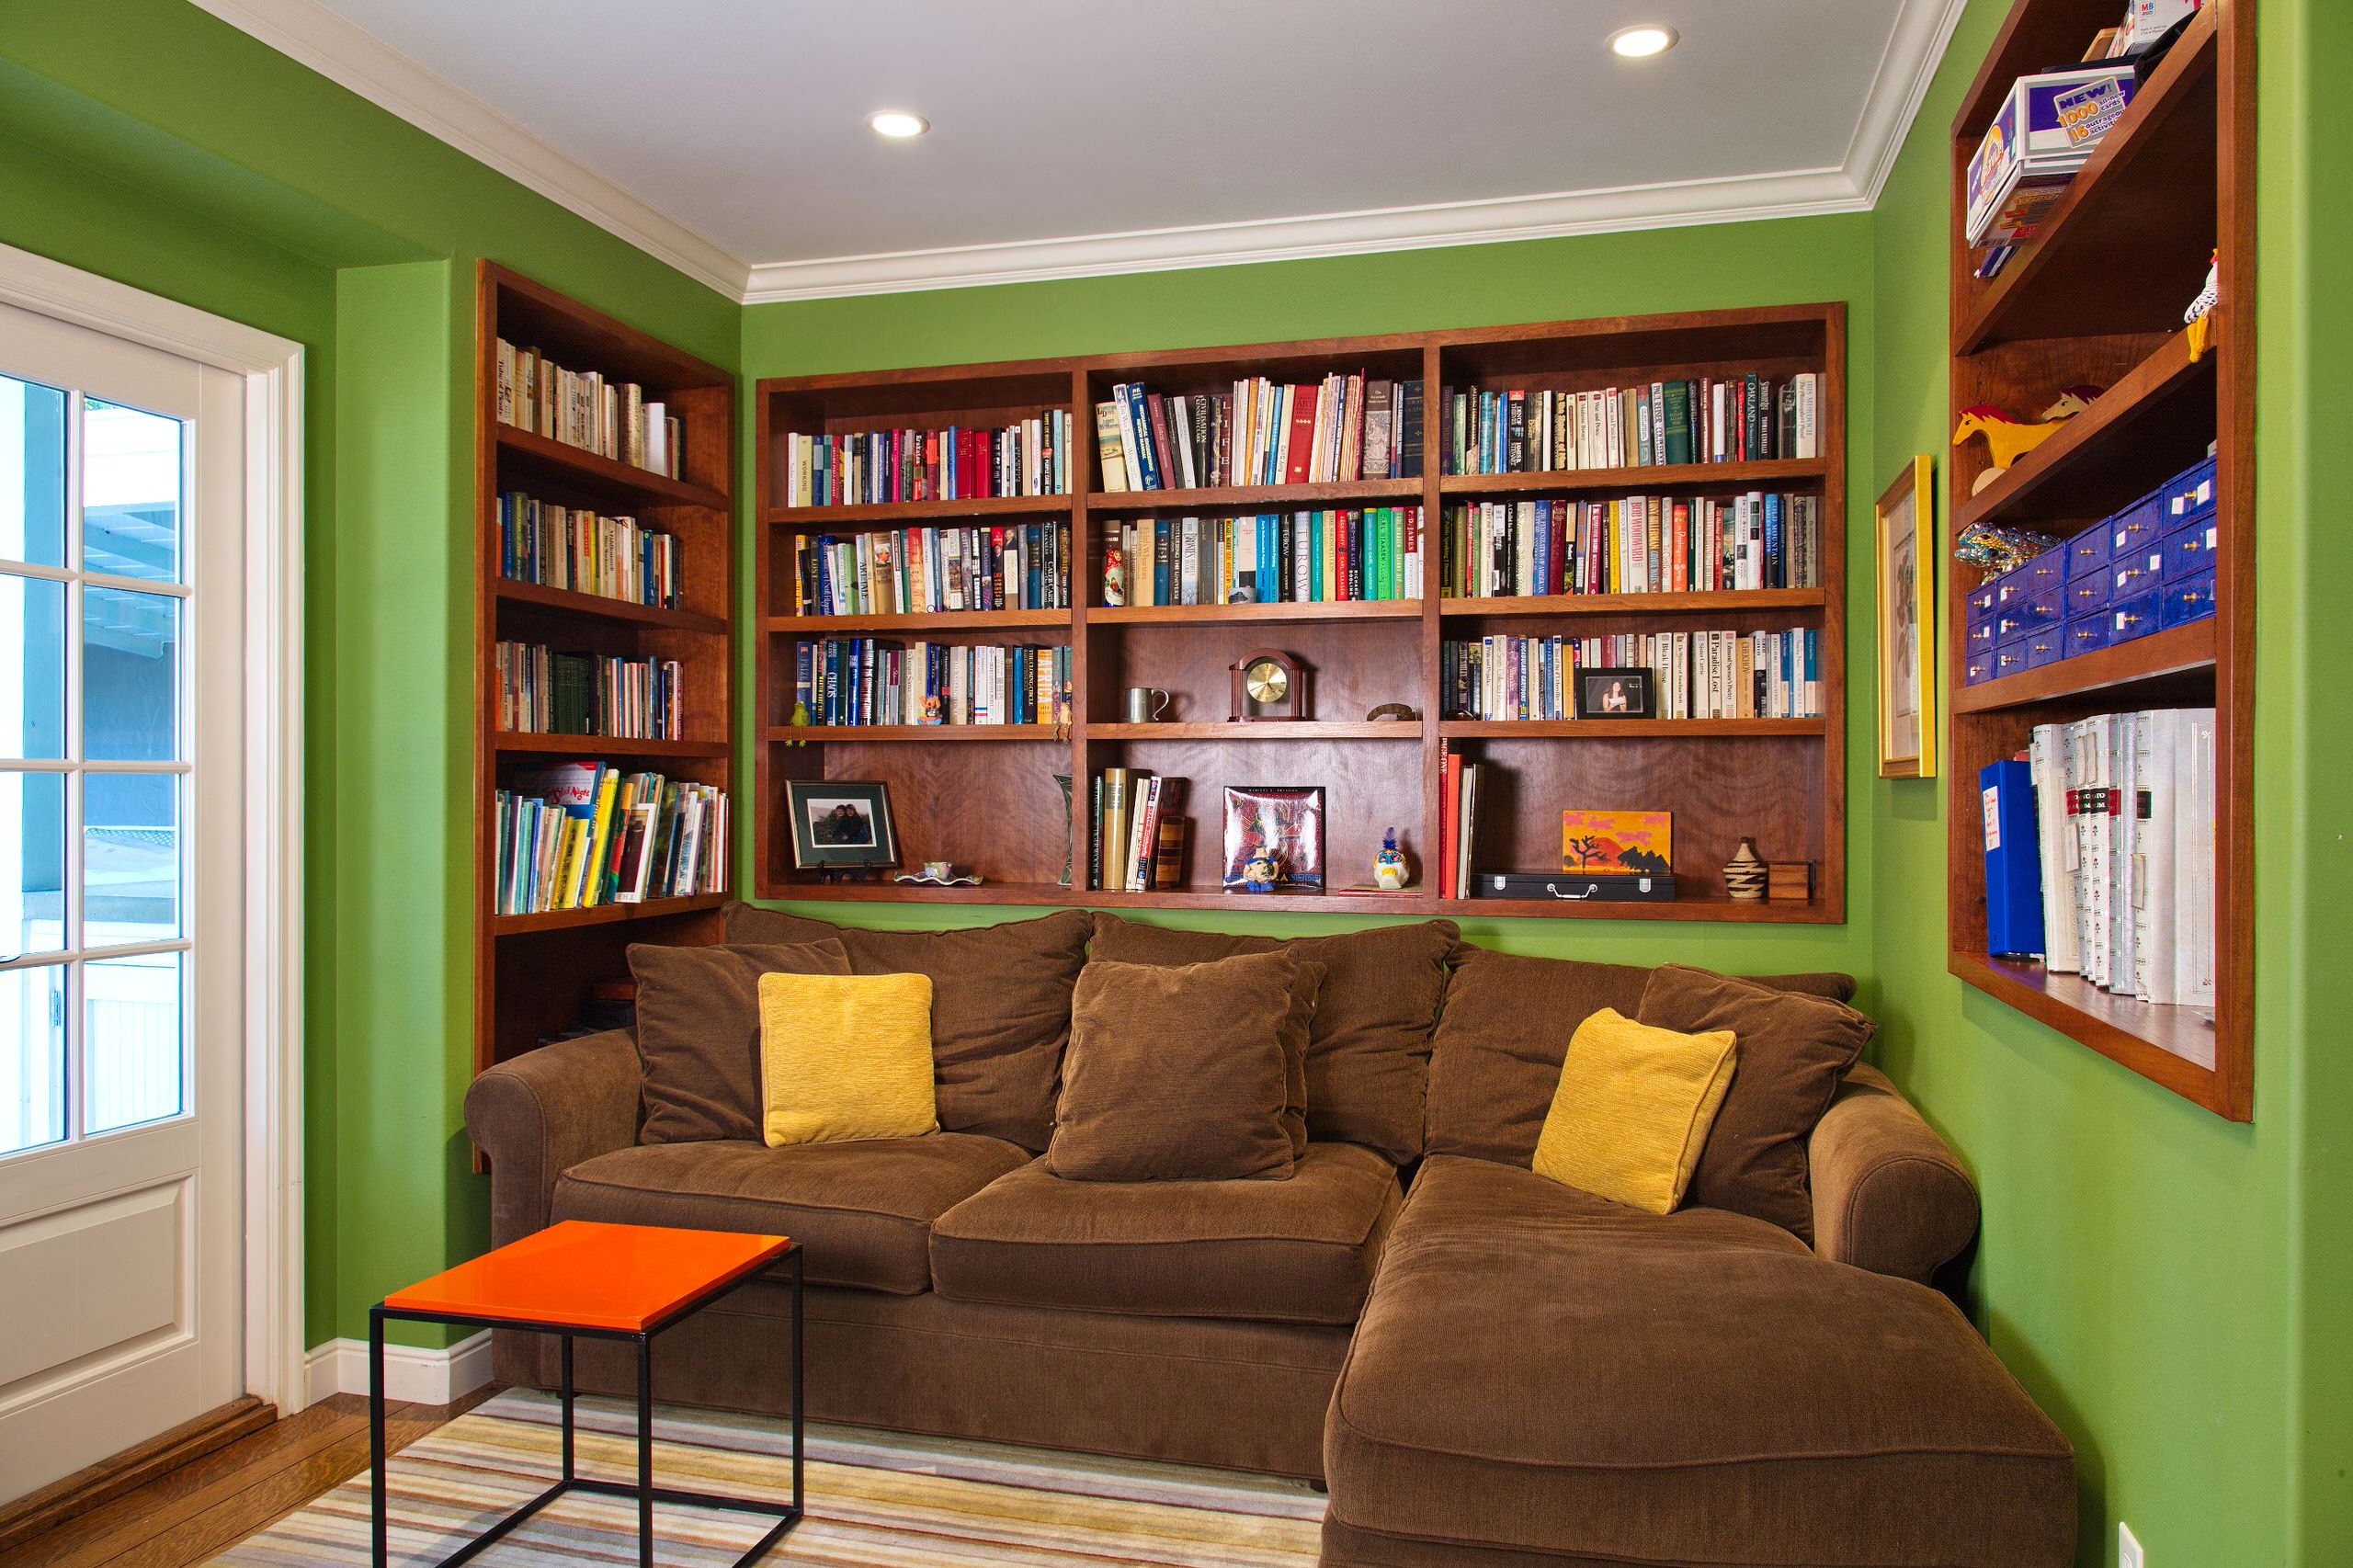 Brown Couch Green Walls - Photos & Ideas | Houzz